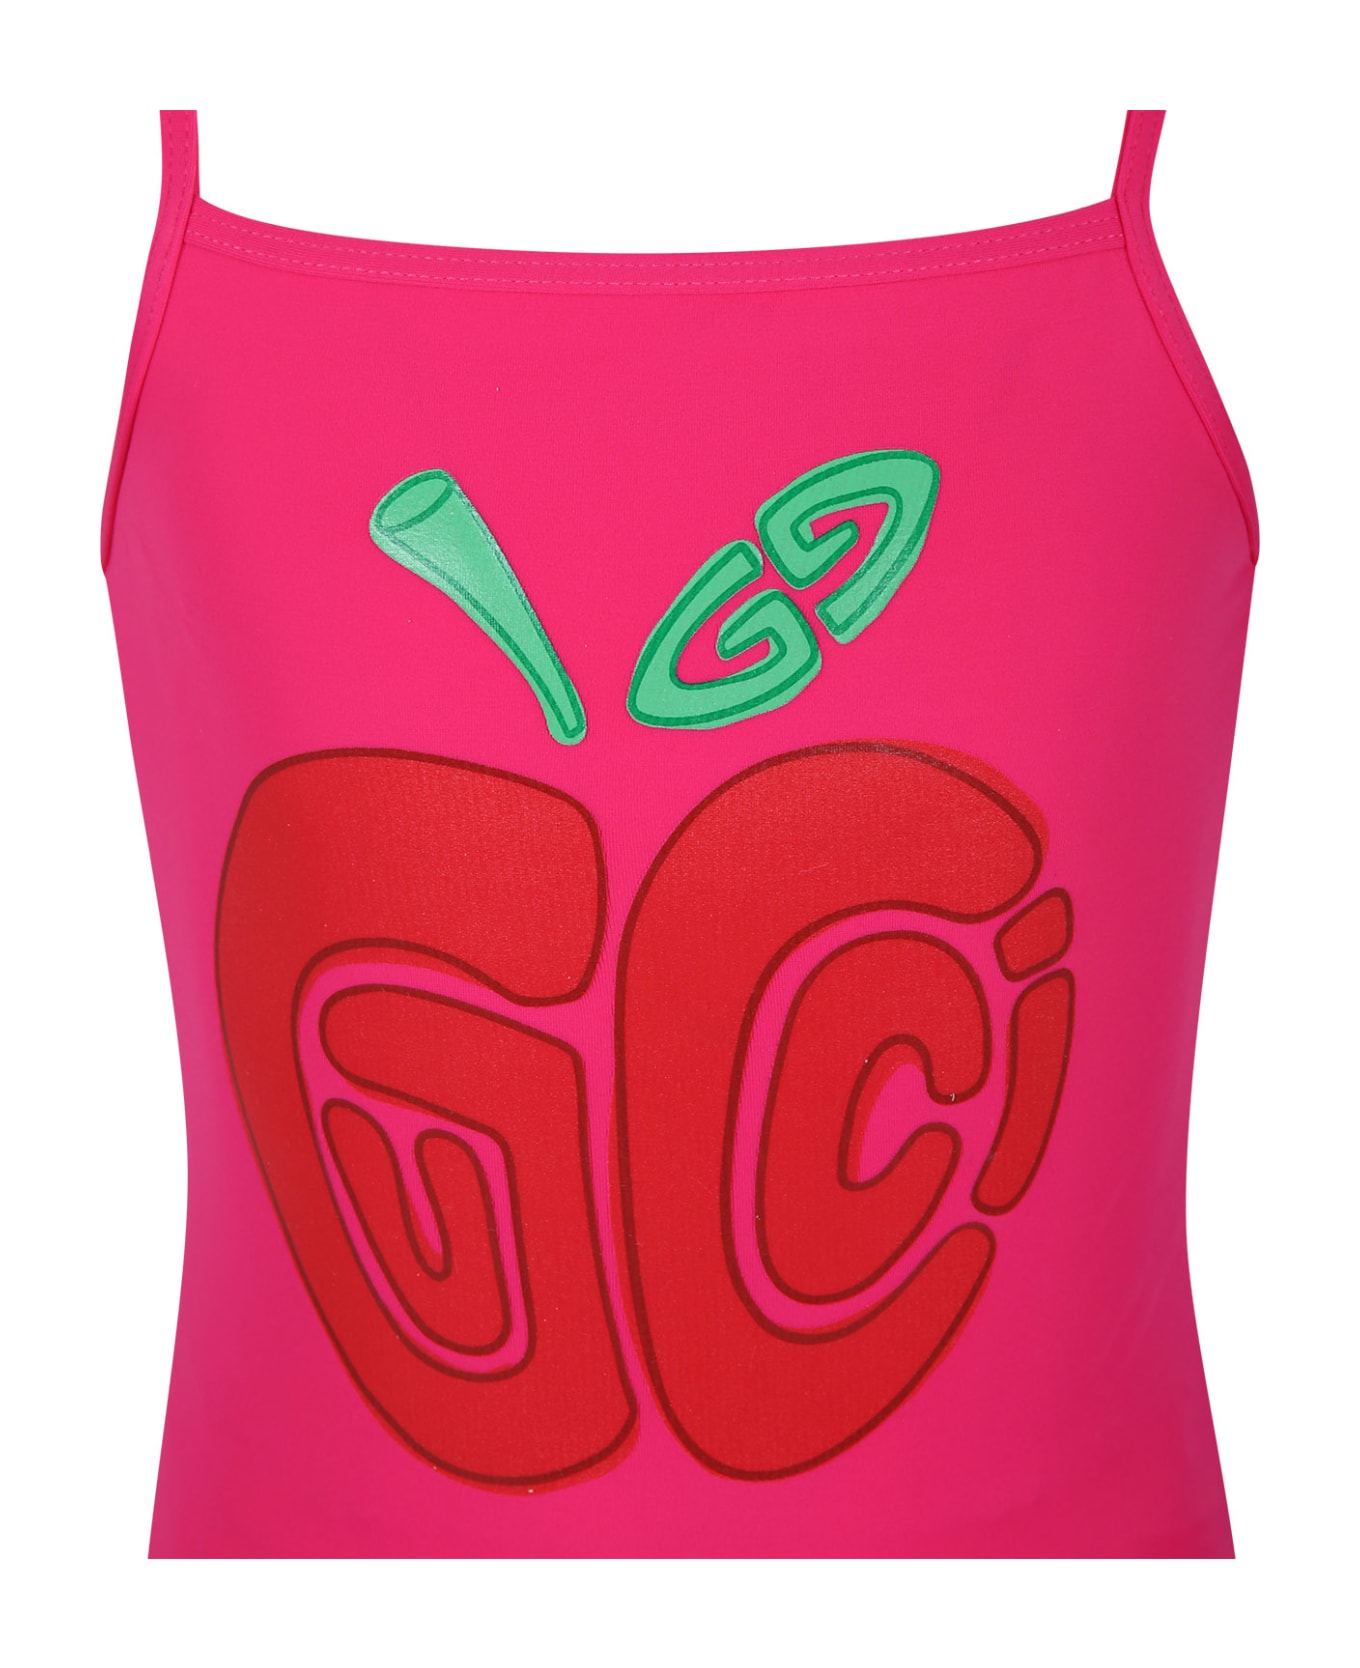 Gucci Fuchsia One-piece Swimsuit For Girl With oversized Gucci Apple Print - Fuchsia